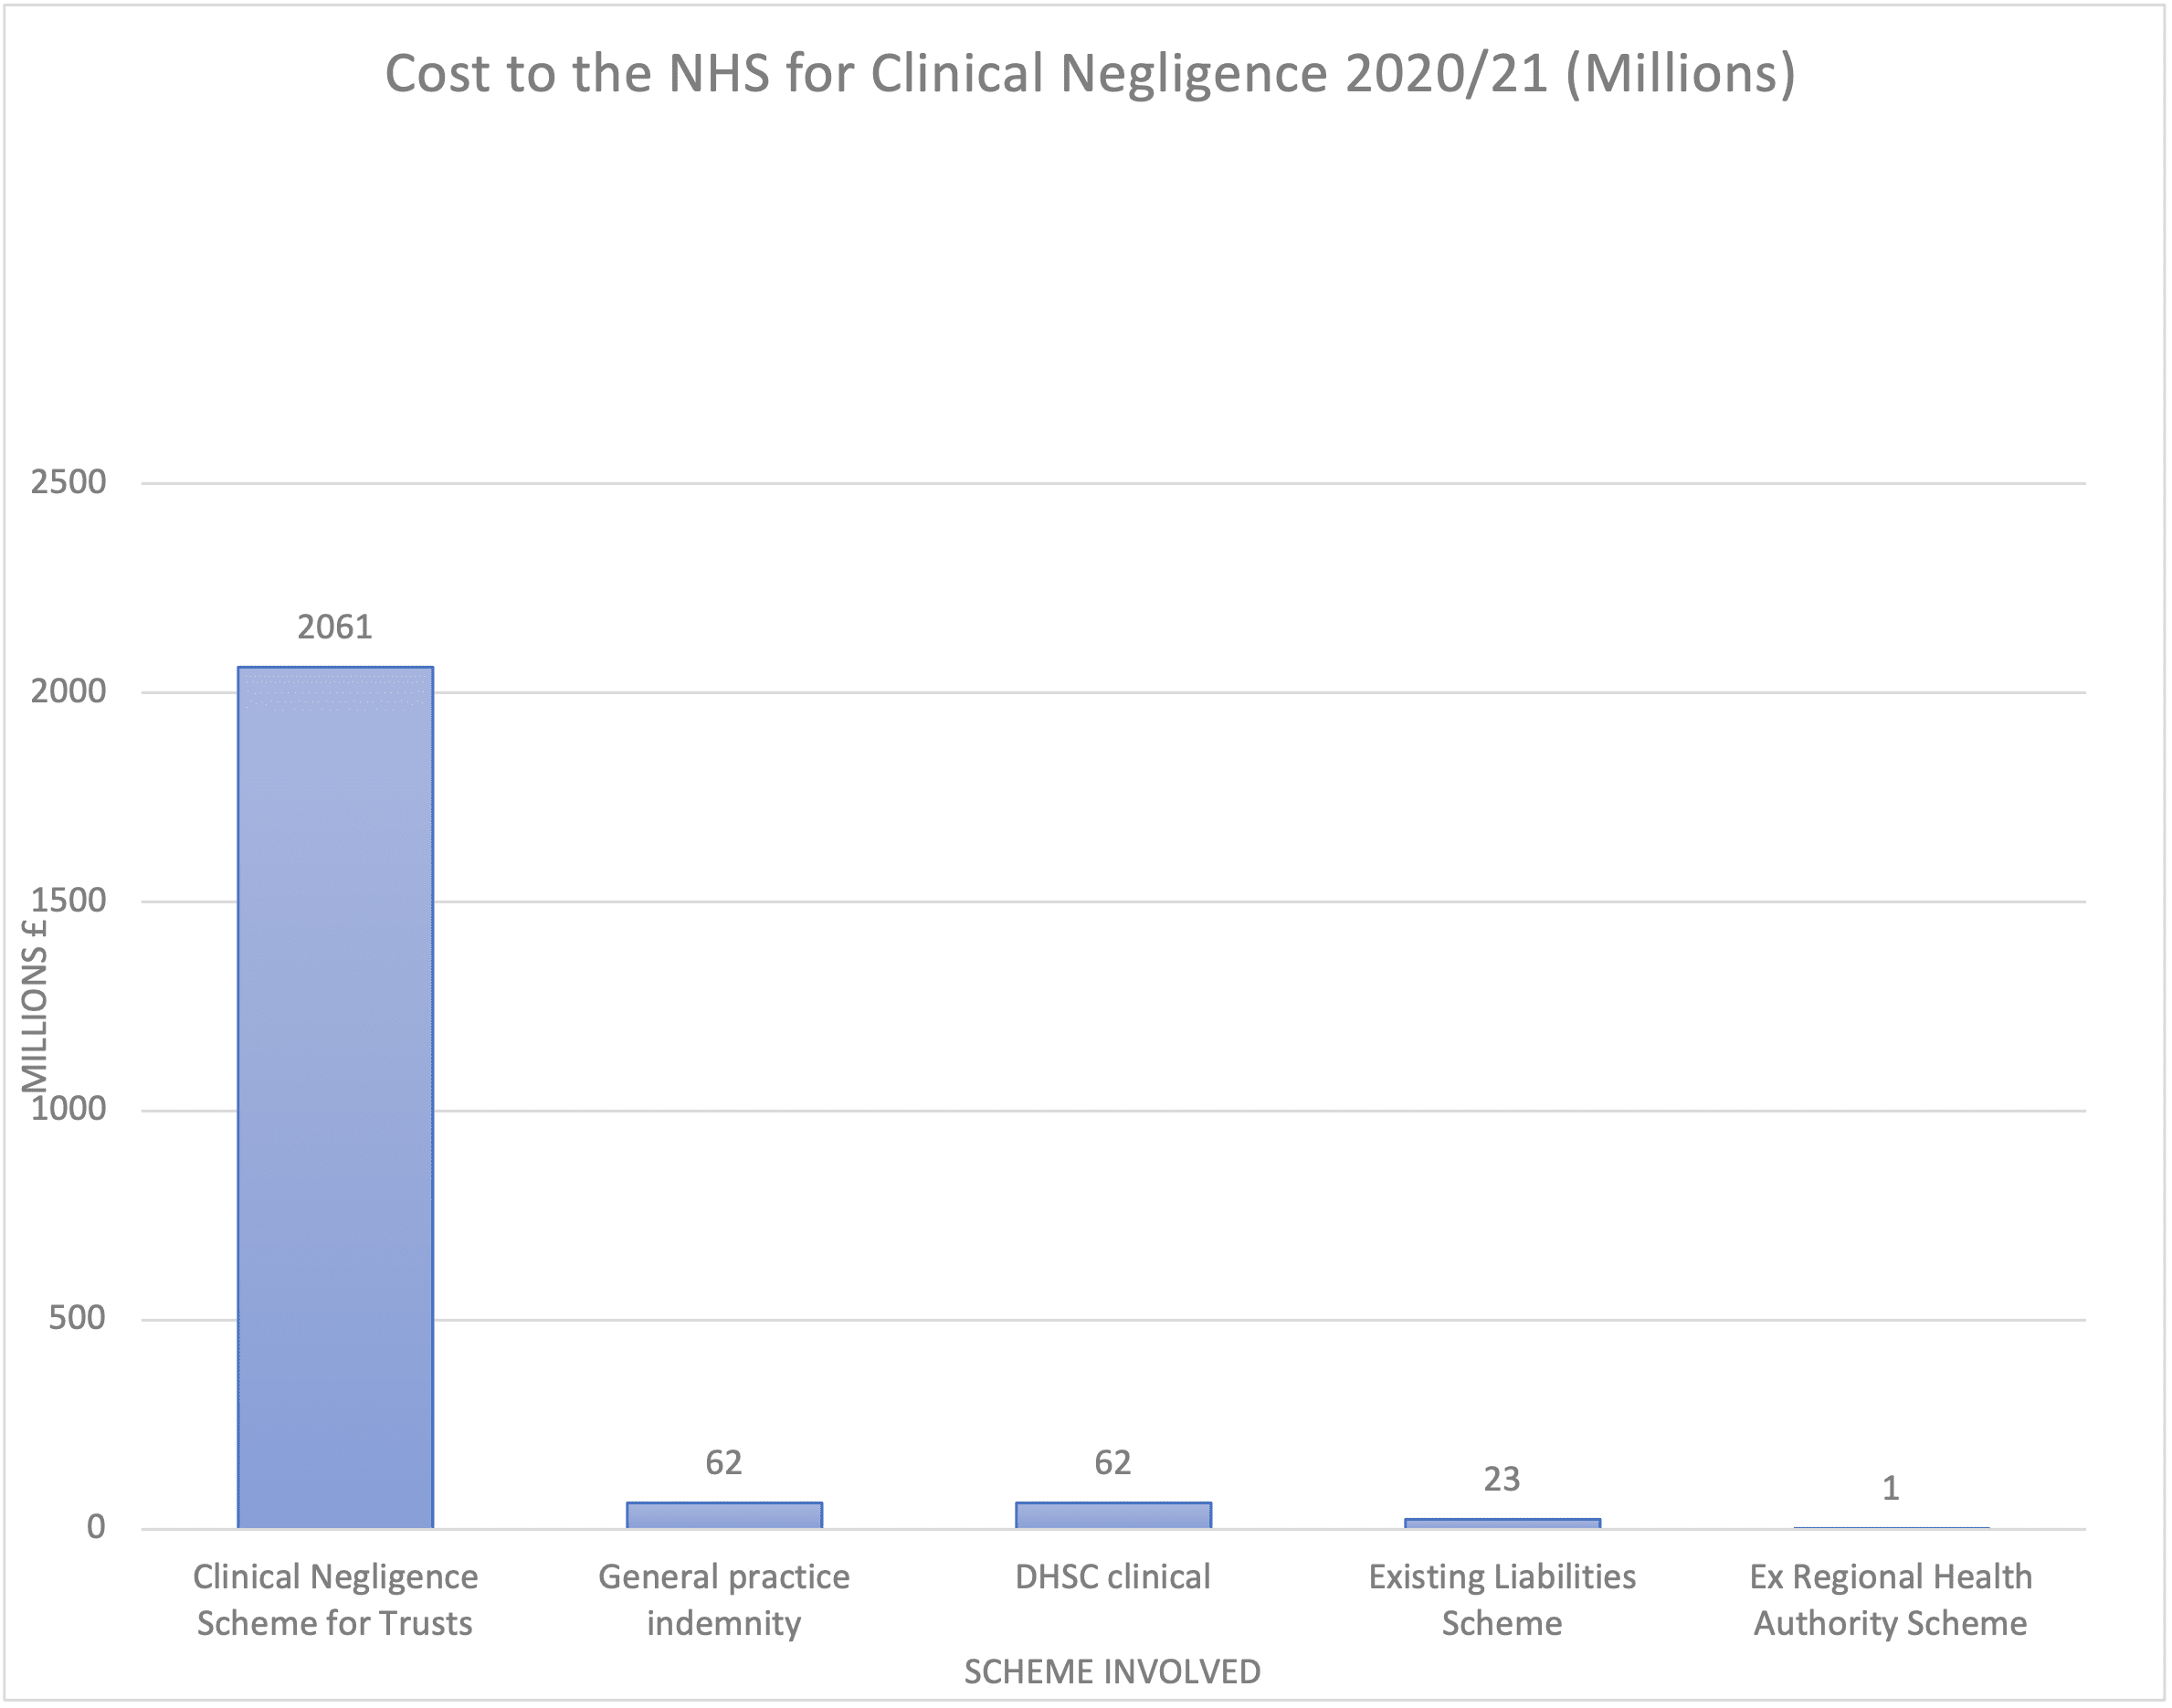 Cost amount to the NHS for Clinical Negligence during 2020/21 in Millions